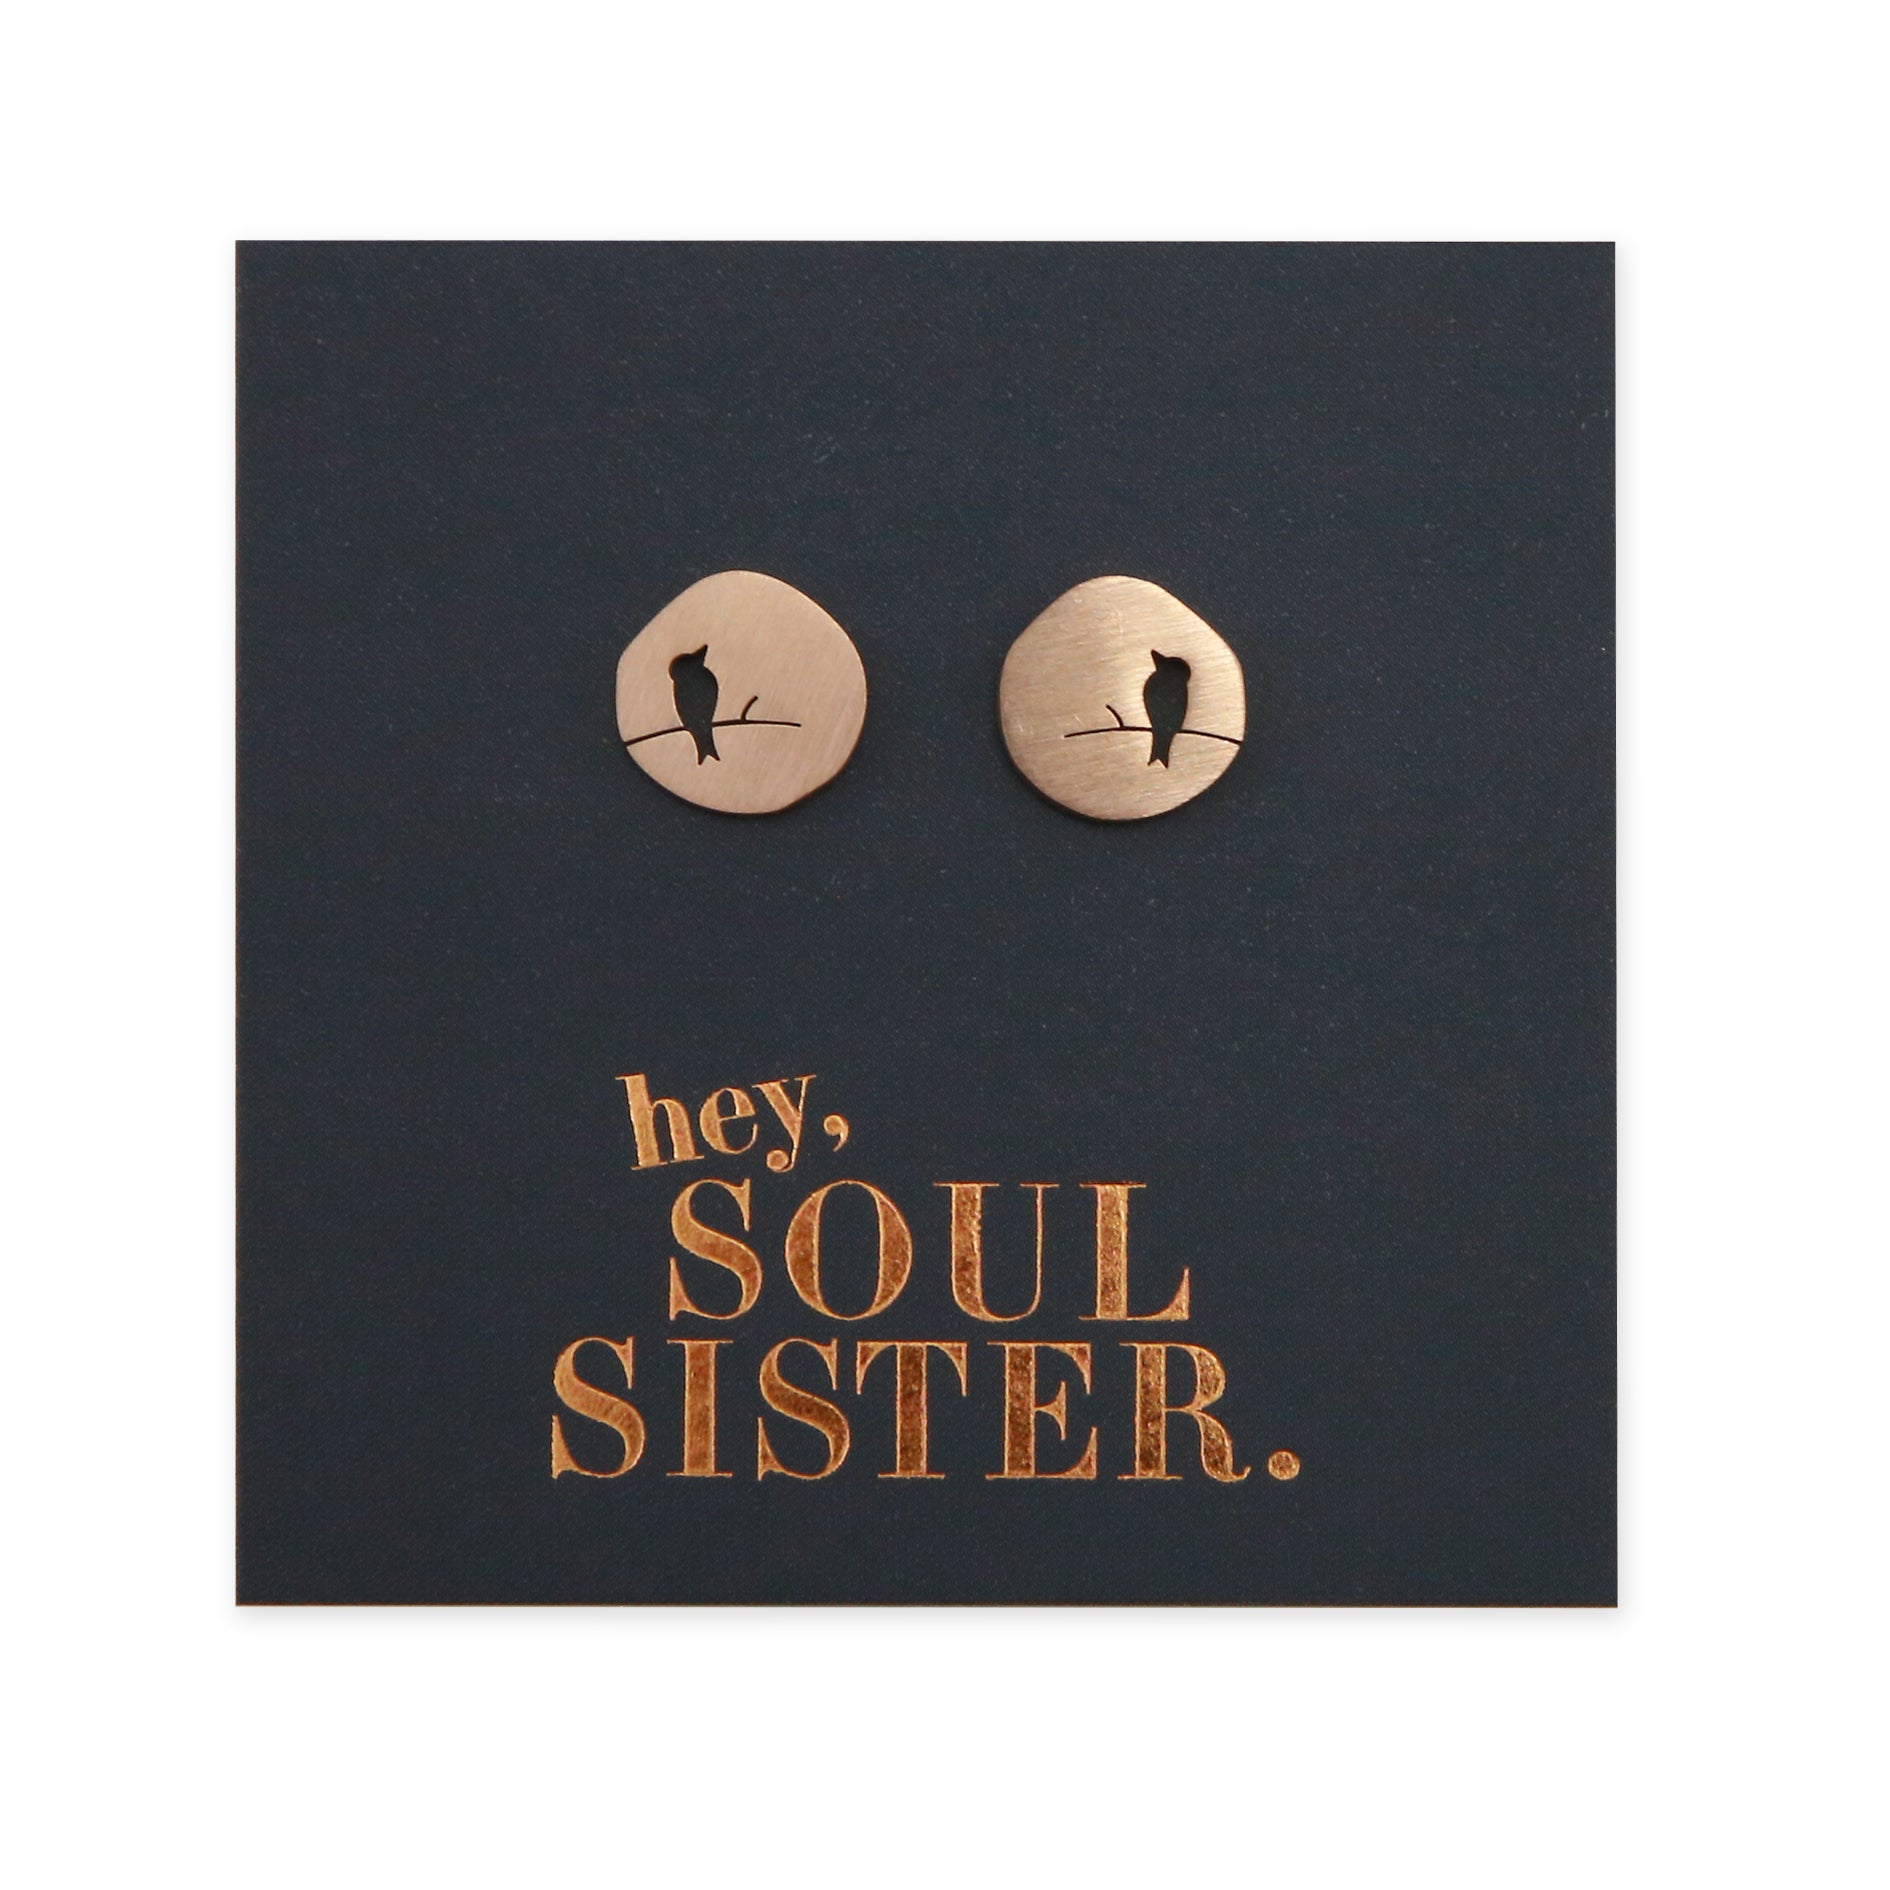 Rose Gold bird cut out earring studs on hey soul sister card.